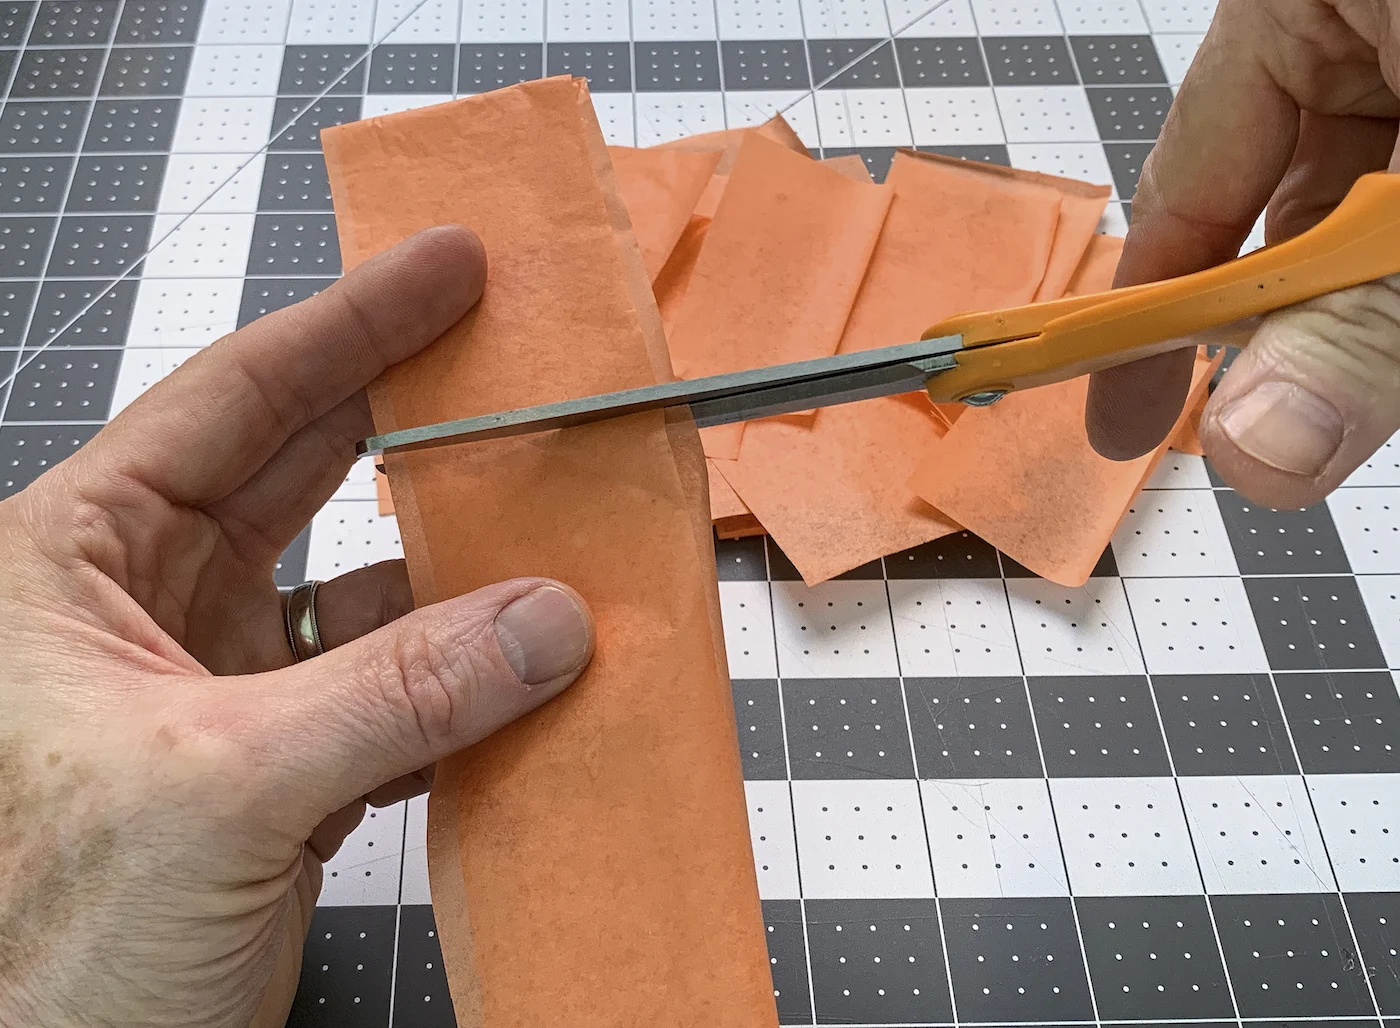 Cutting tissue paper into squares with a pair of scissors